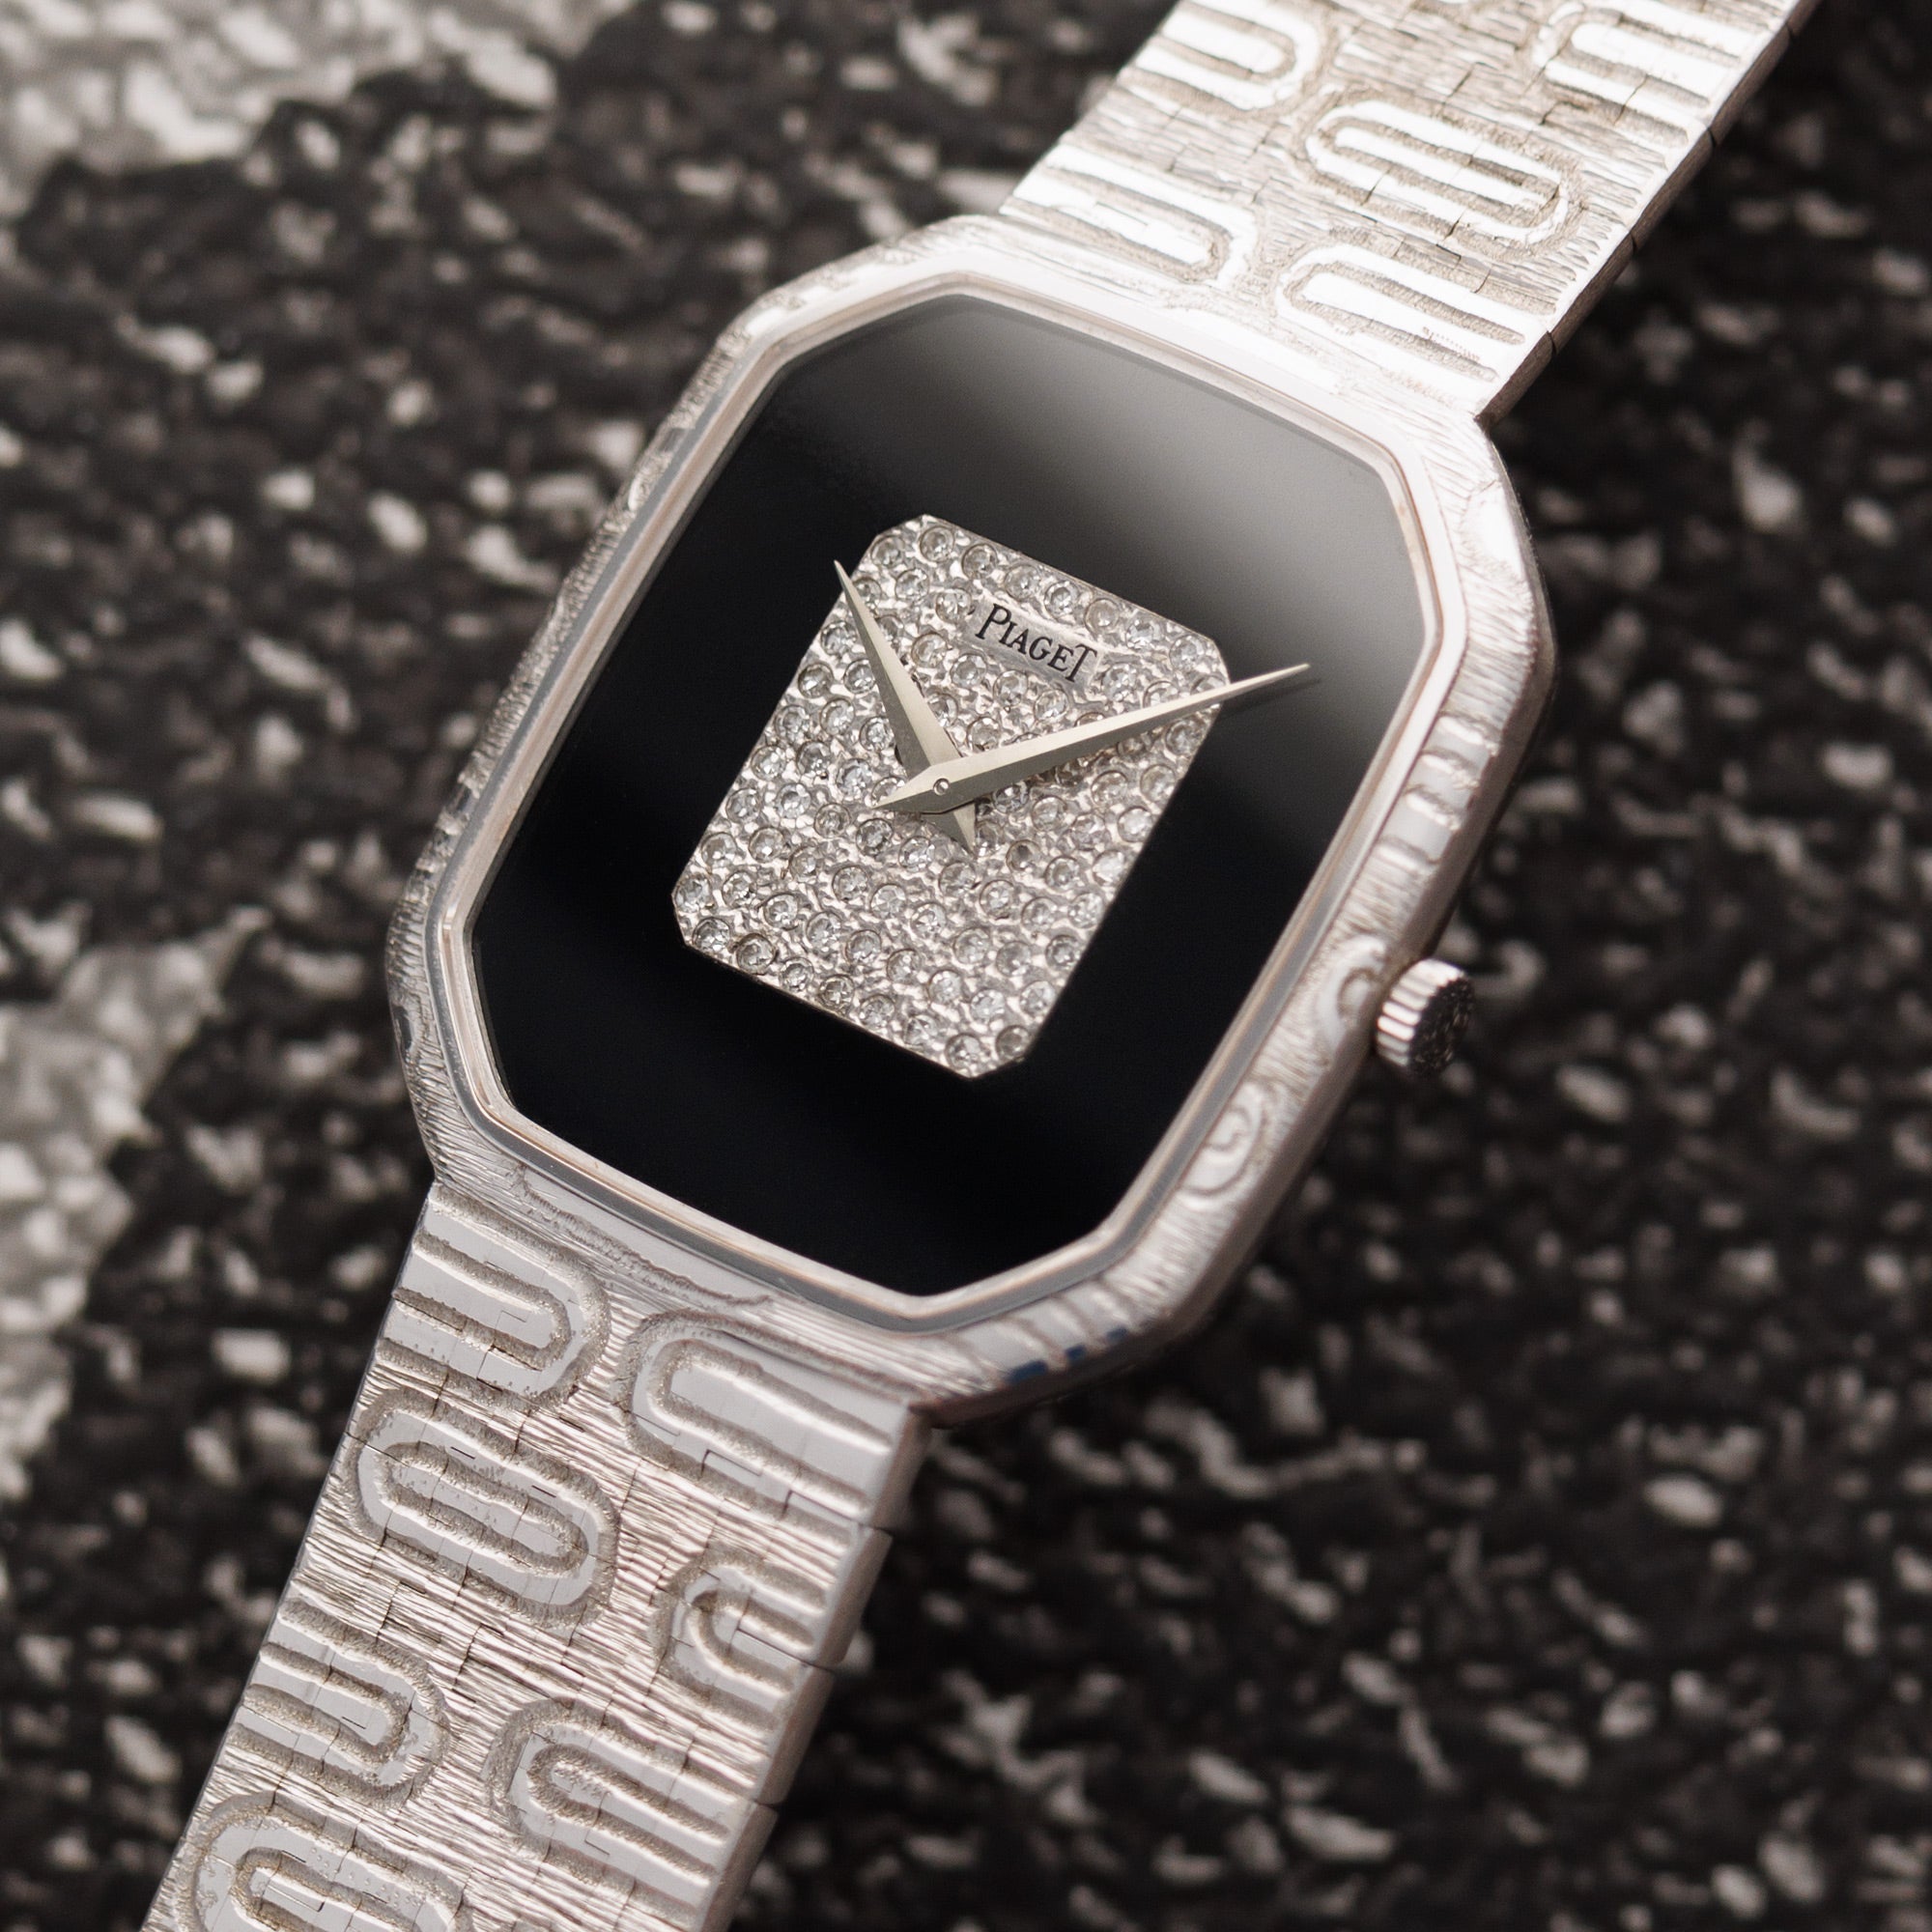 Piaget - Piaget White Gold Onyx and Diamond Watch Ref. 9791A15 - The Keystone Watches